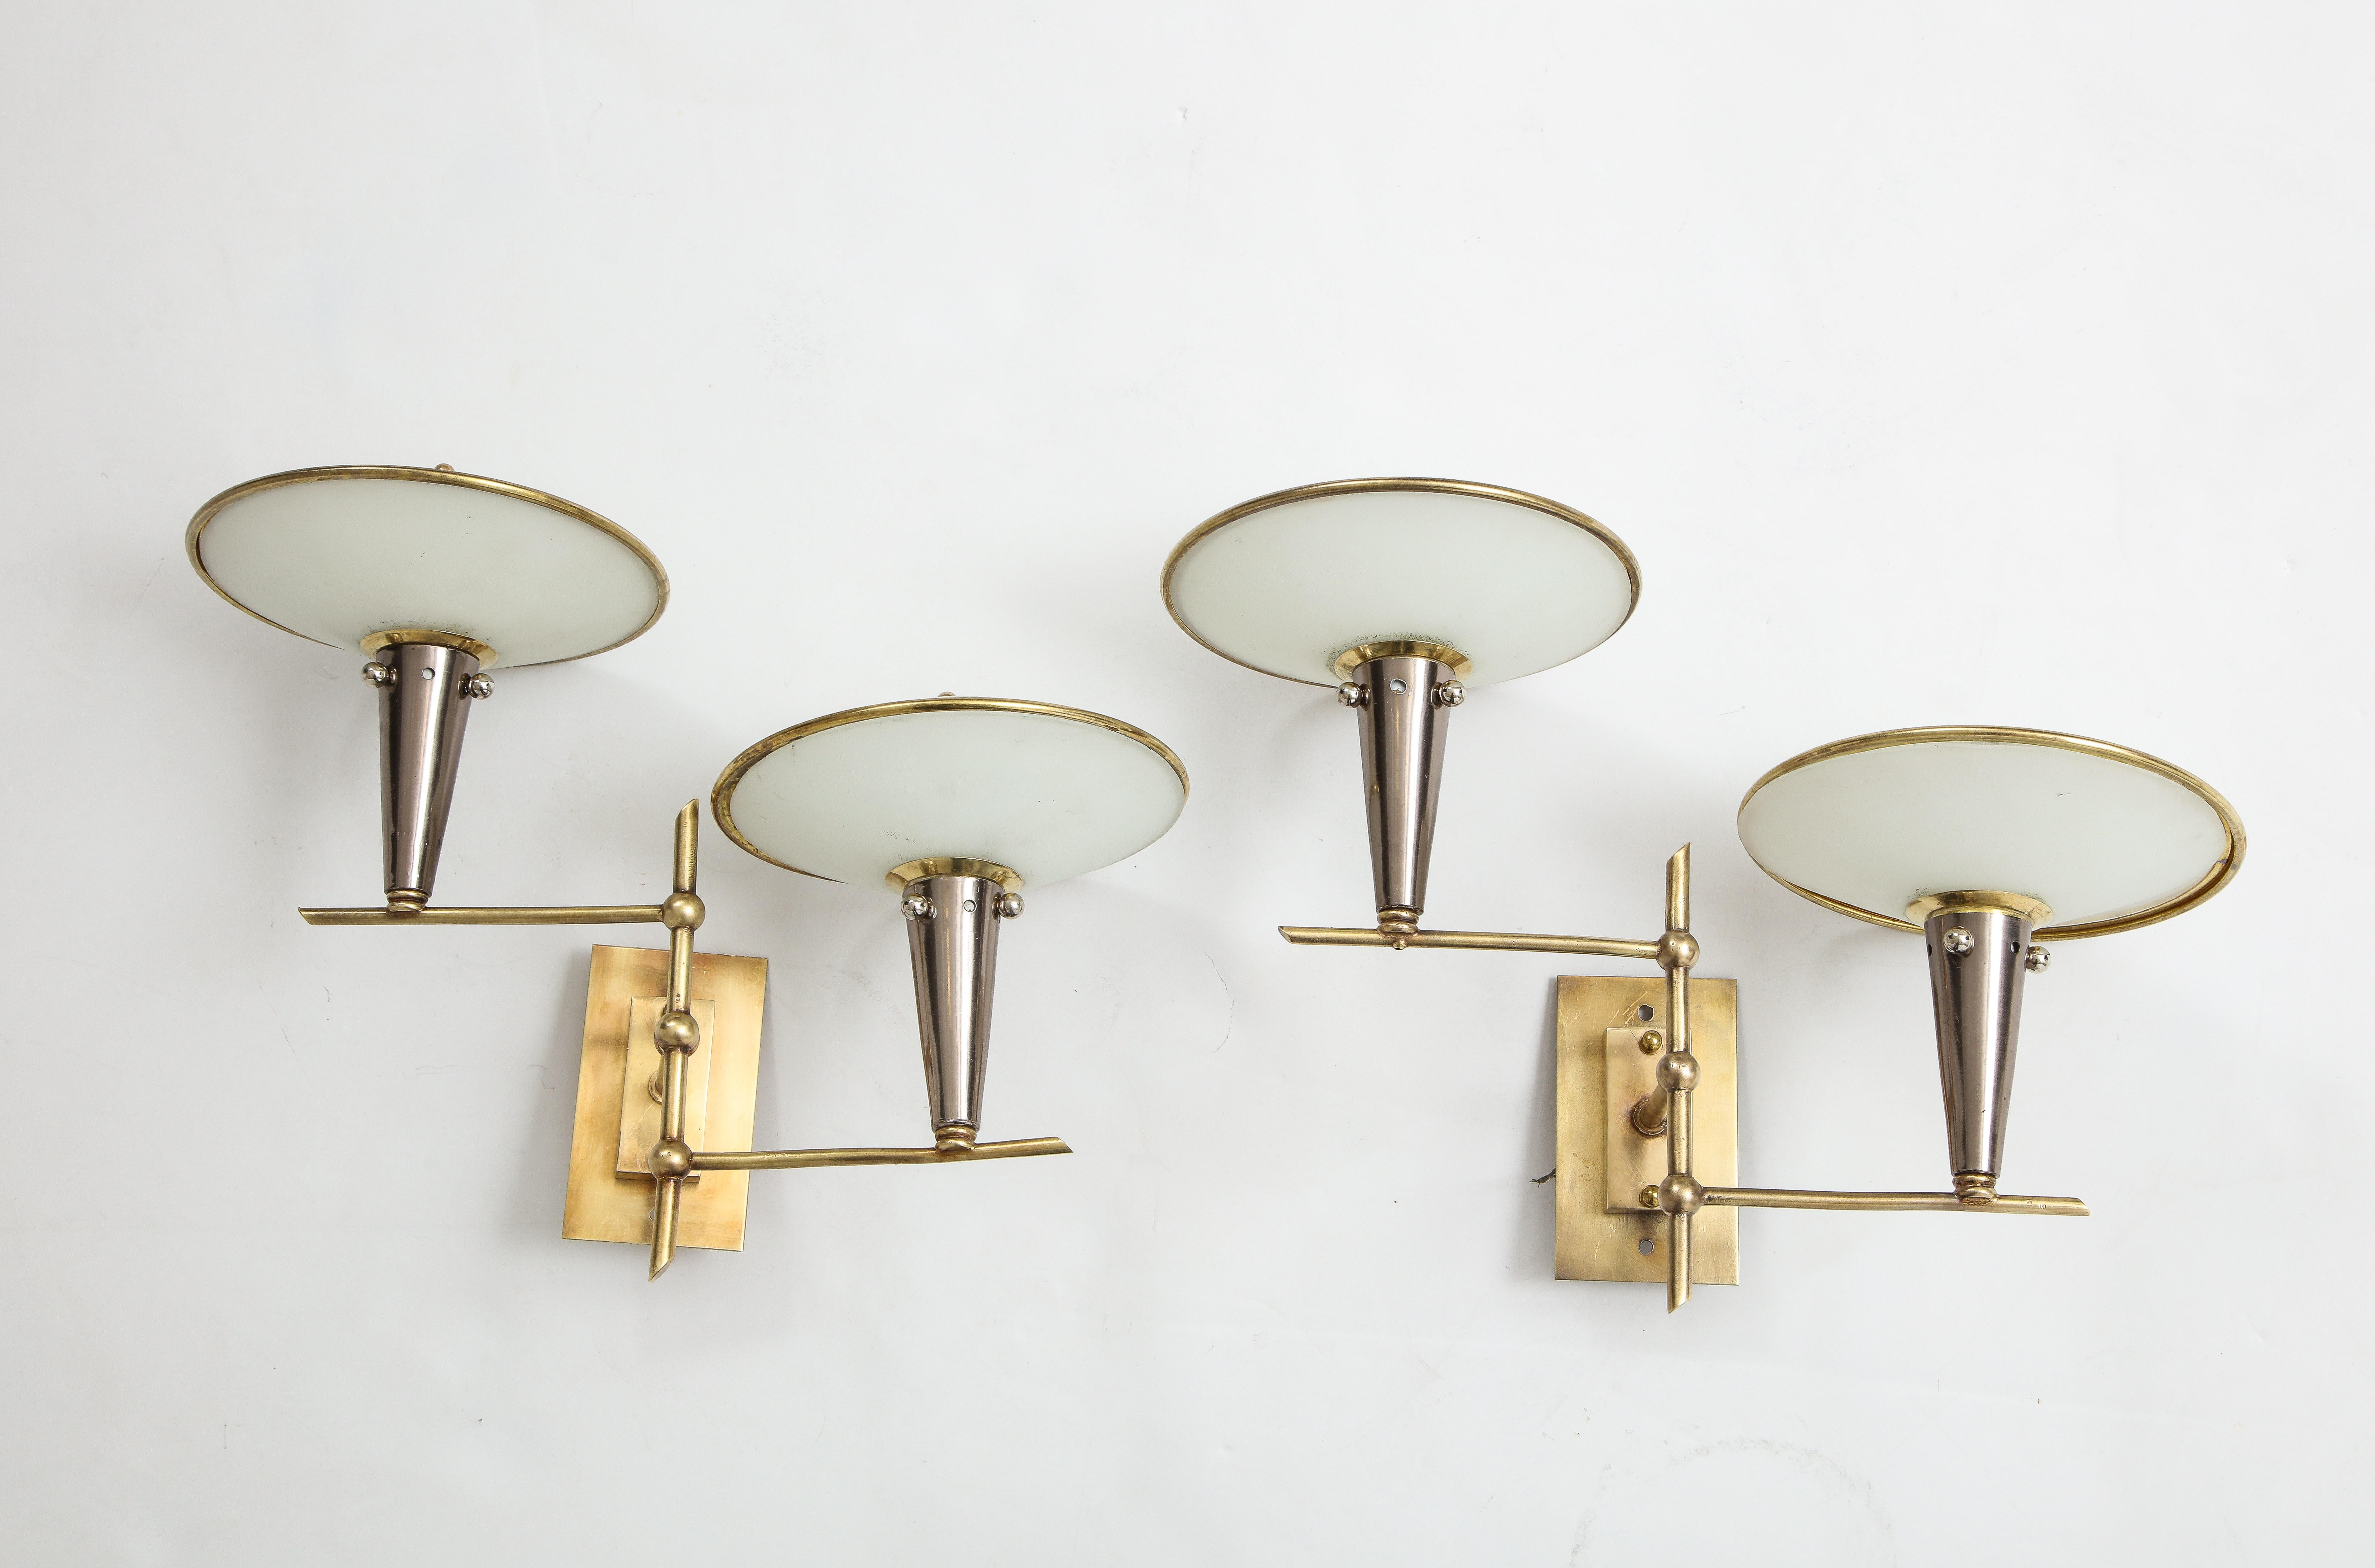 A pair of very unusual and interesting Italian 1950s wall lights. The brass wall plates attach to a vertical brass stem from which two adjustable brass arms extend; with conical shaped nickel supports at either end, below spherical shaped opaline